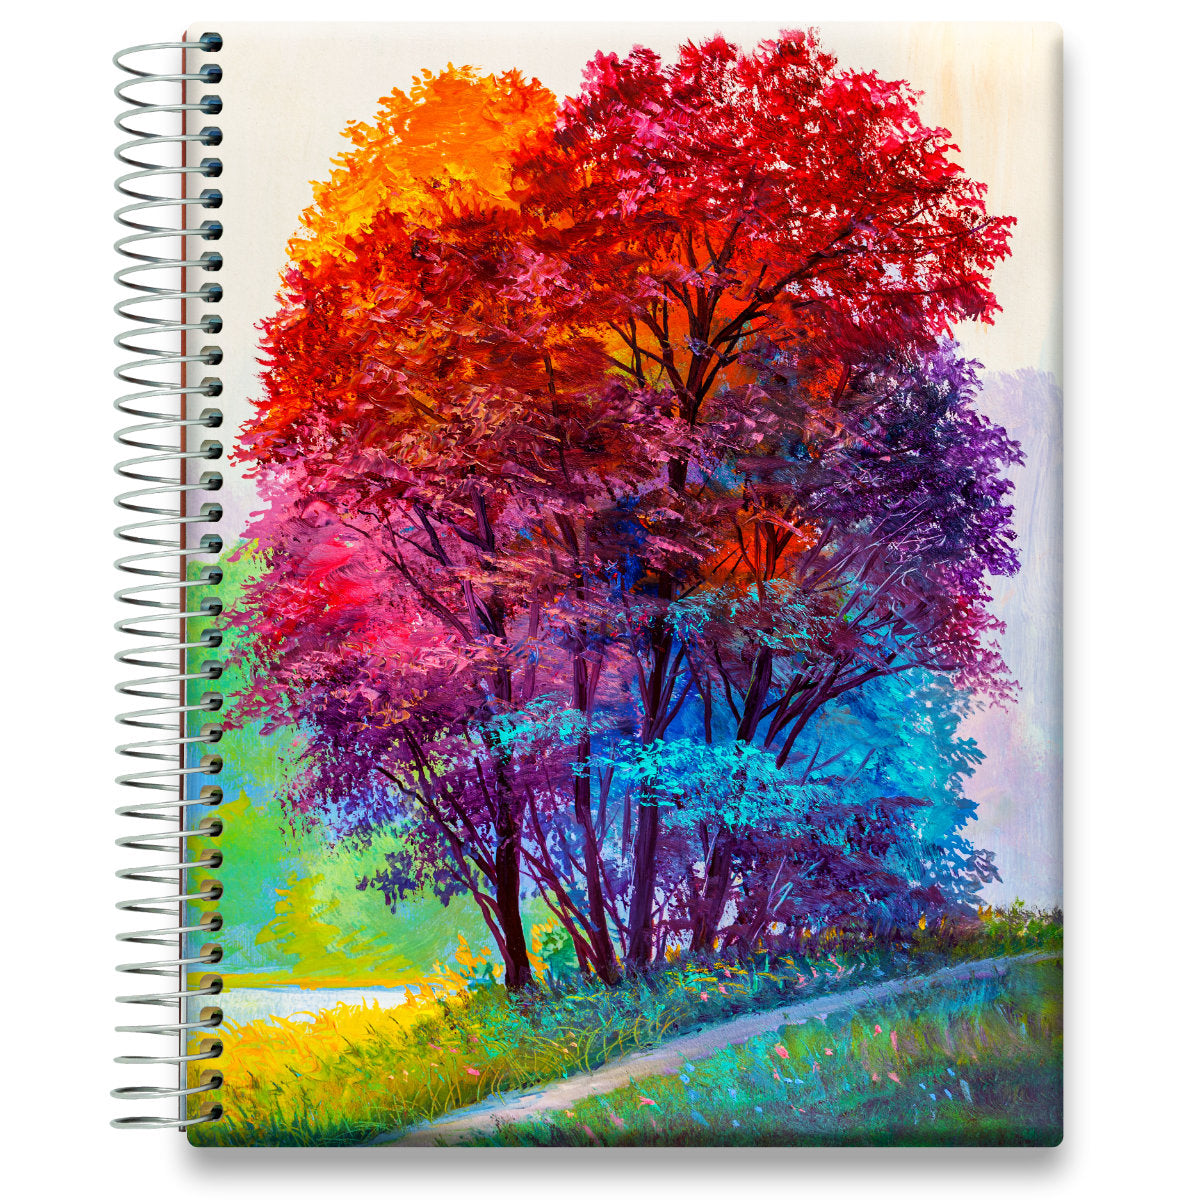 Oct 2024 to Dec 2025 Planner - Oil Painting Forest